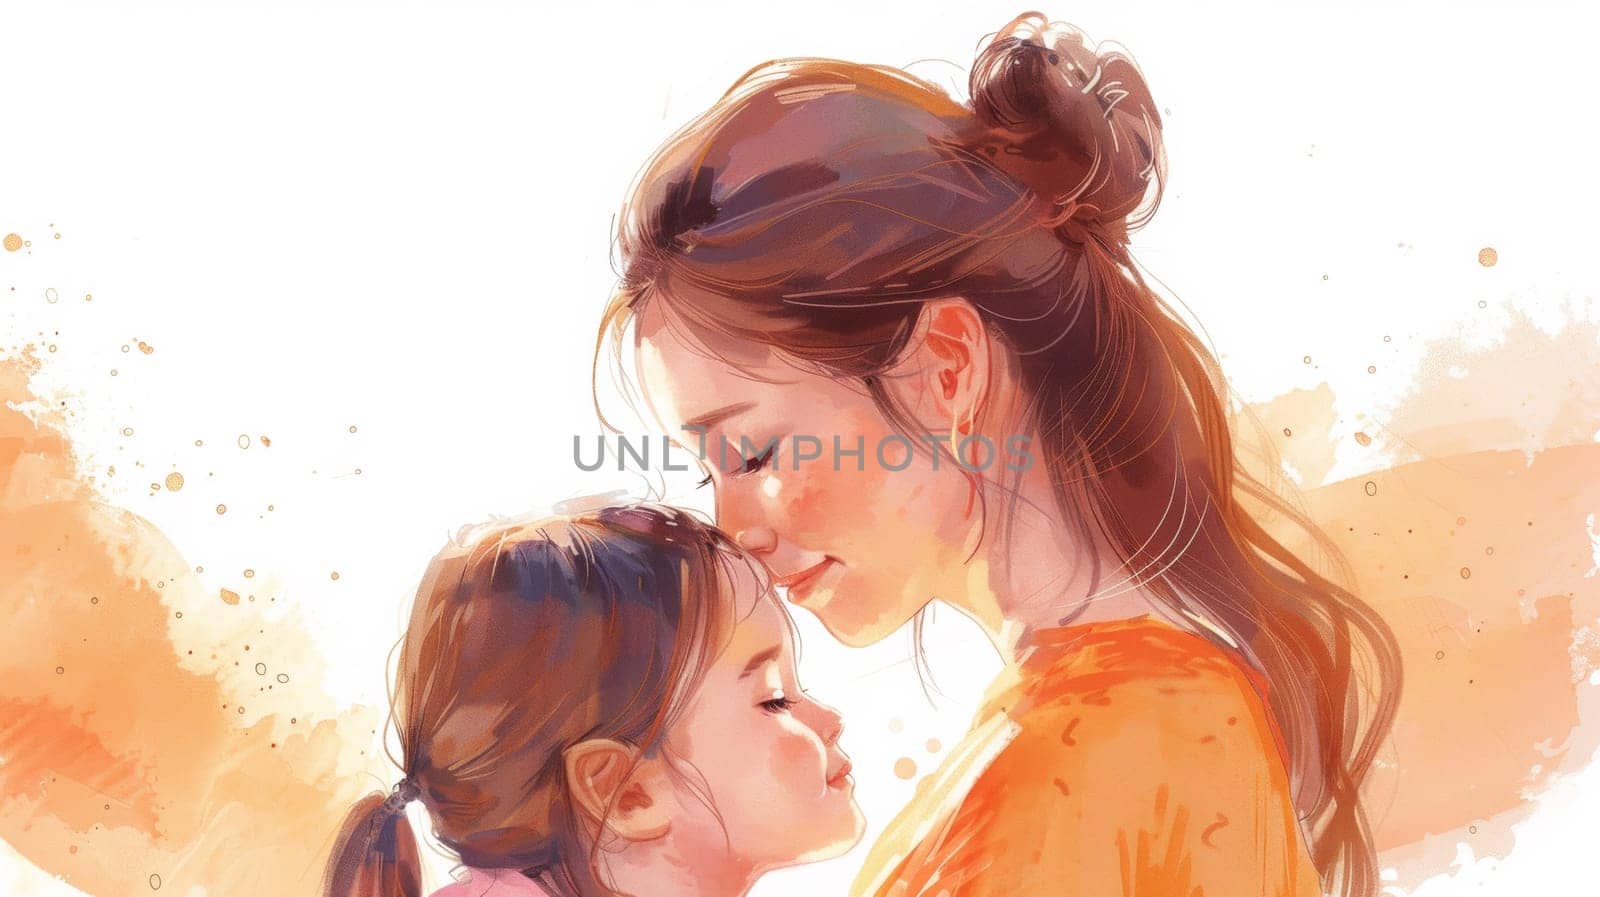 A woman and child hugging each other with a watercolor background